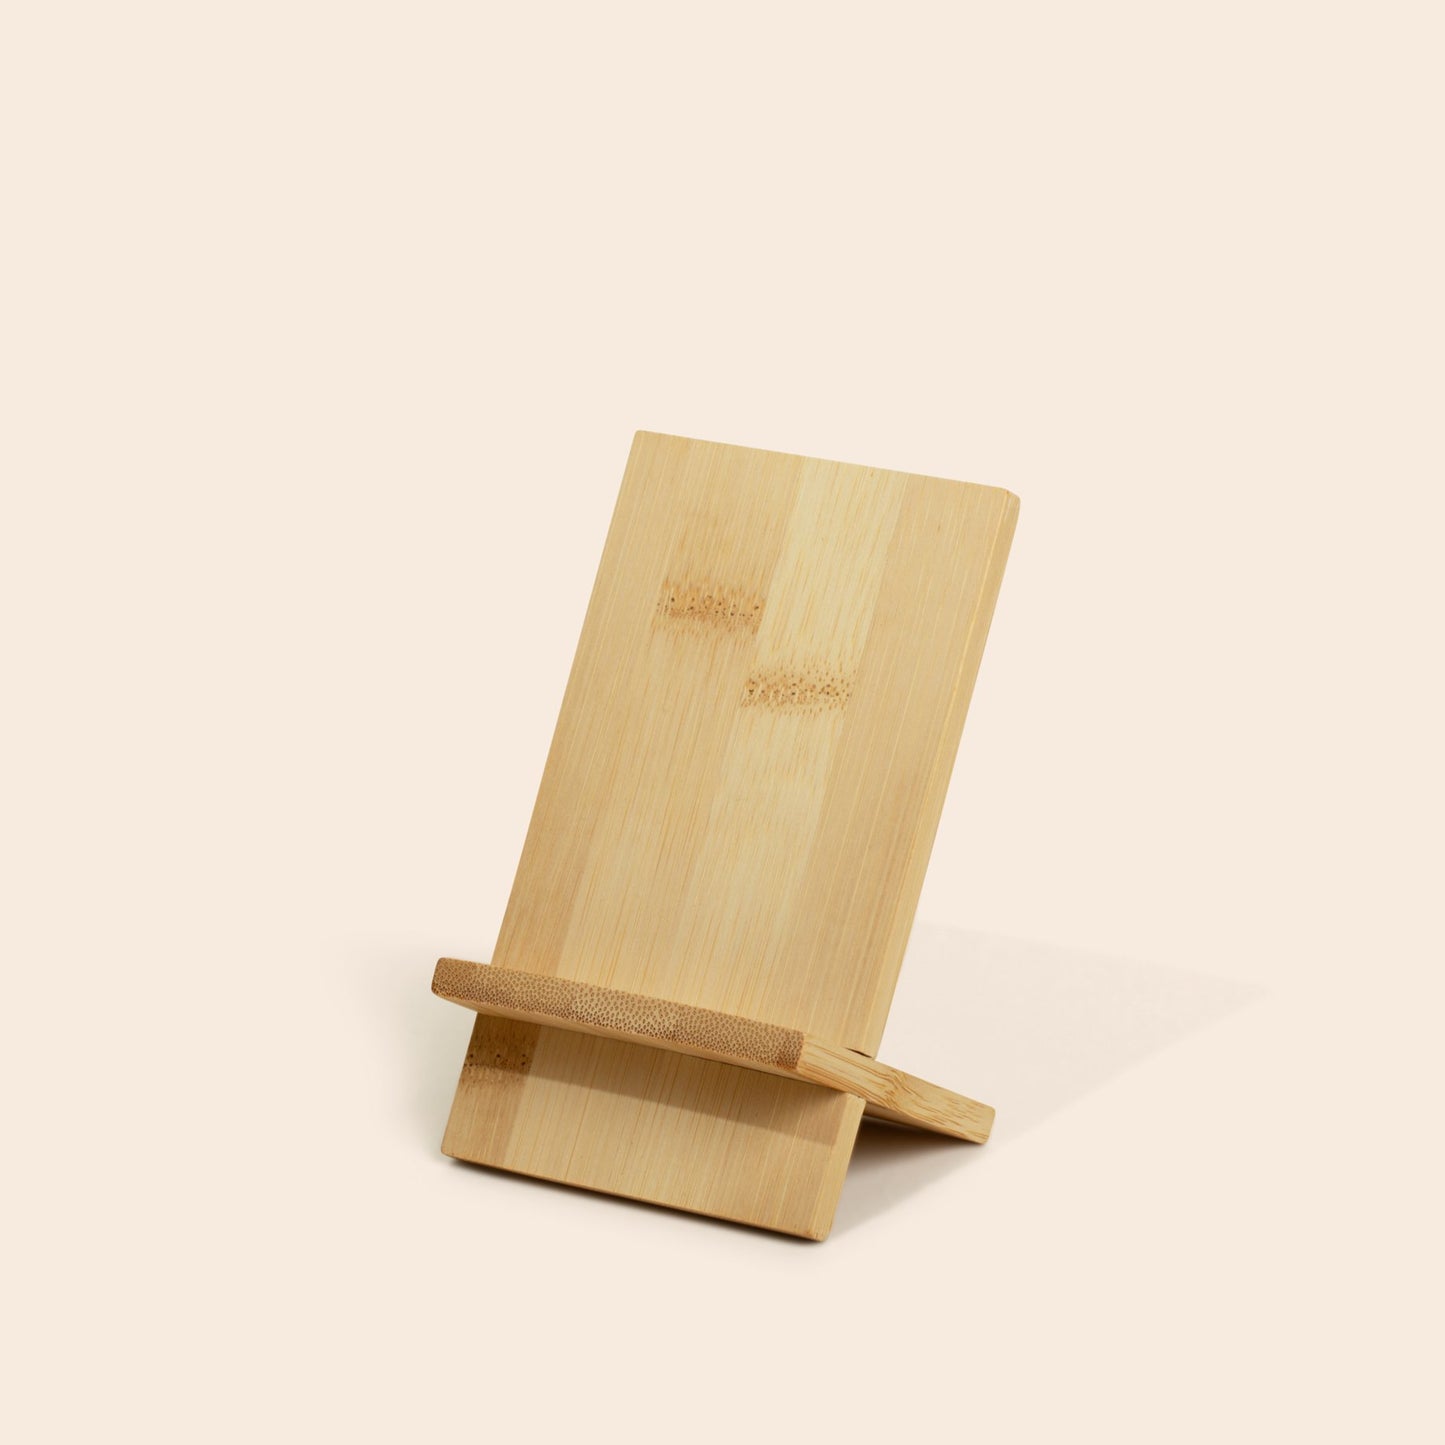 sustainable, zero waste, earth-friendly, plastic-free Bamboo Phone Stand - Bamboo Switch